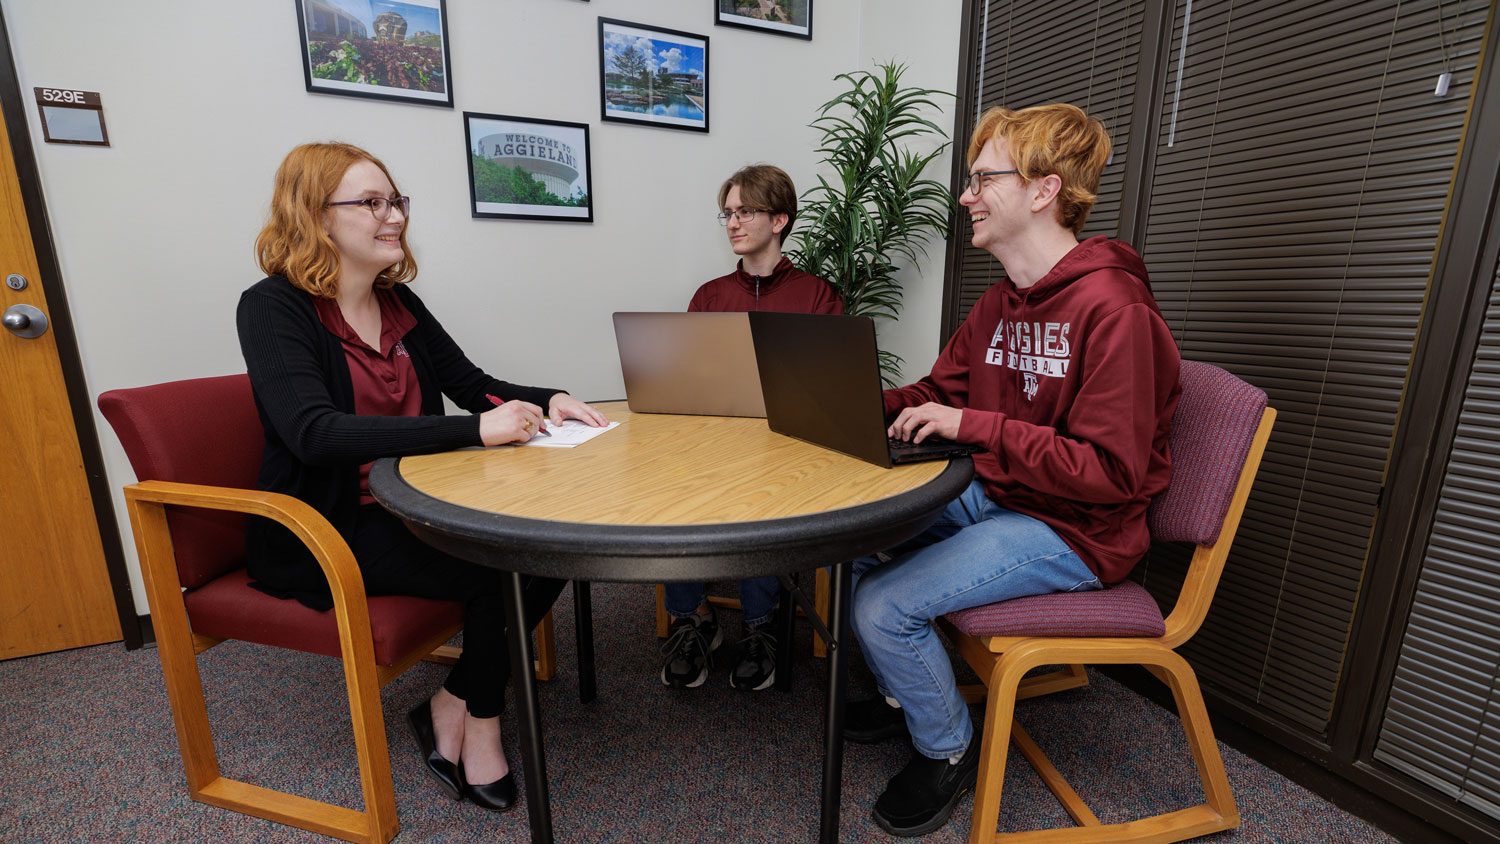 An academic advisor meets with two students.